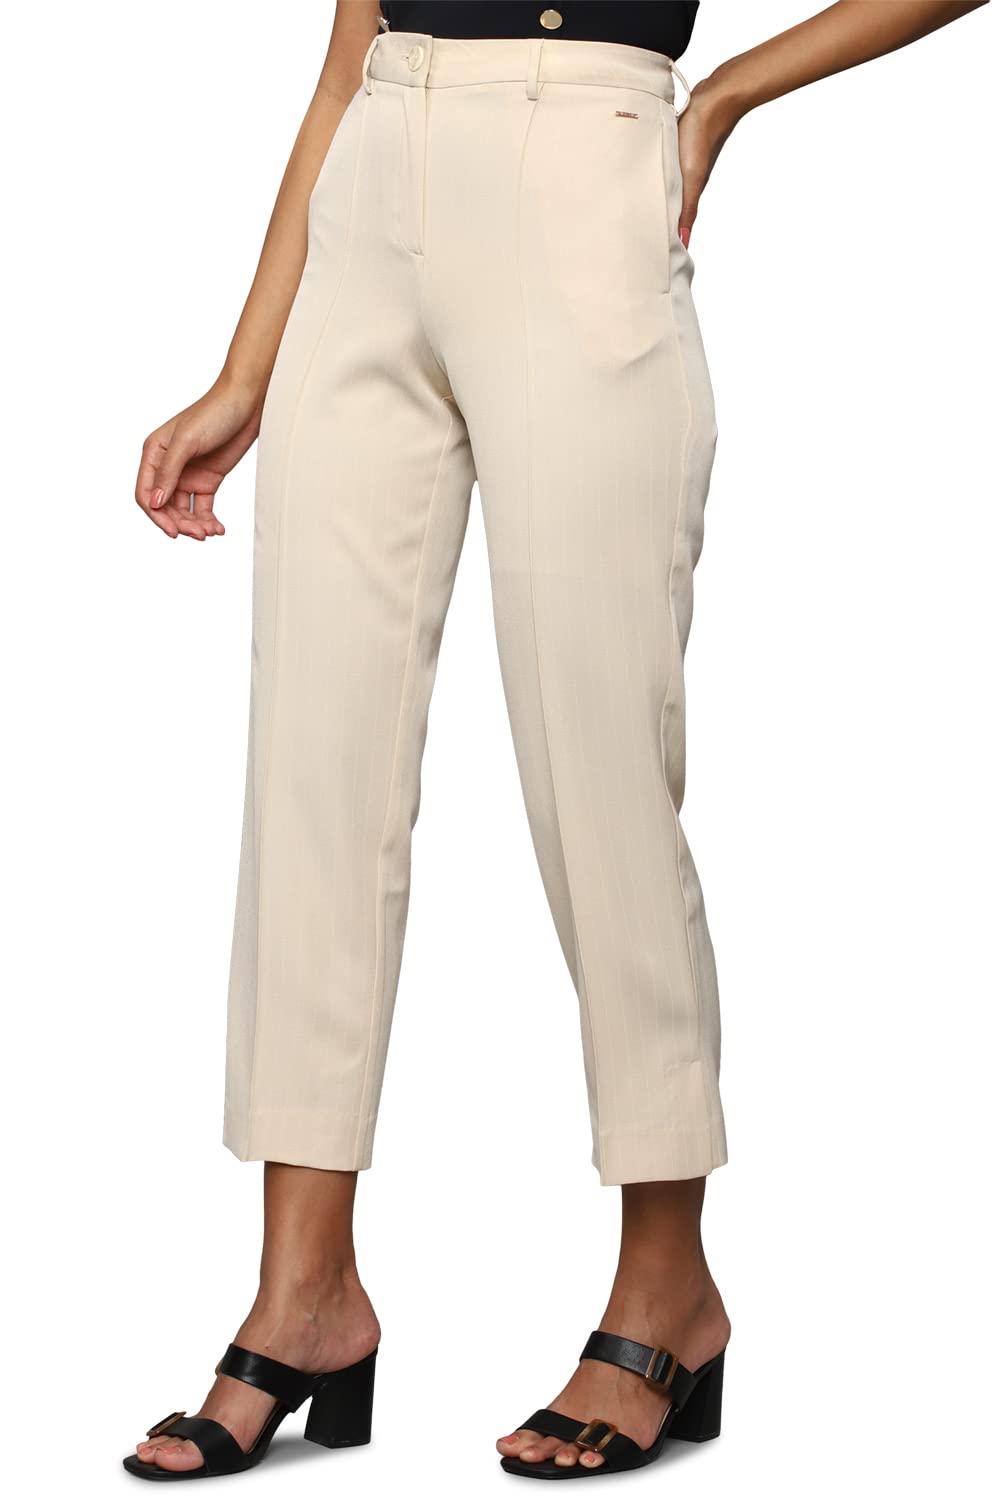 Light Yellow Solid Ankle-Length Business Casual Women Regular Fit Trousers  - Selling Fast at Pantaloons.com